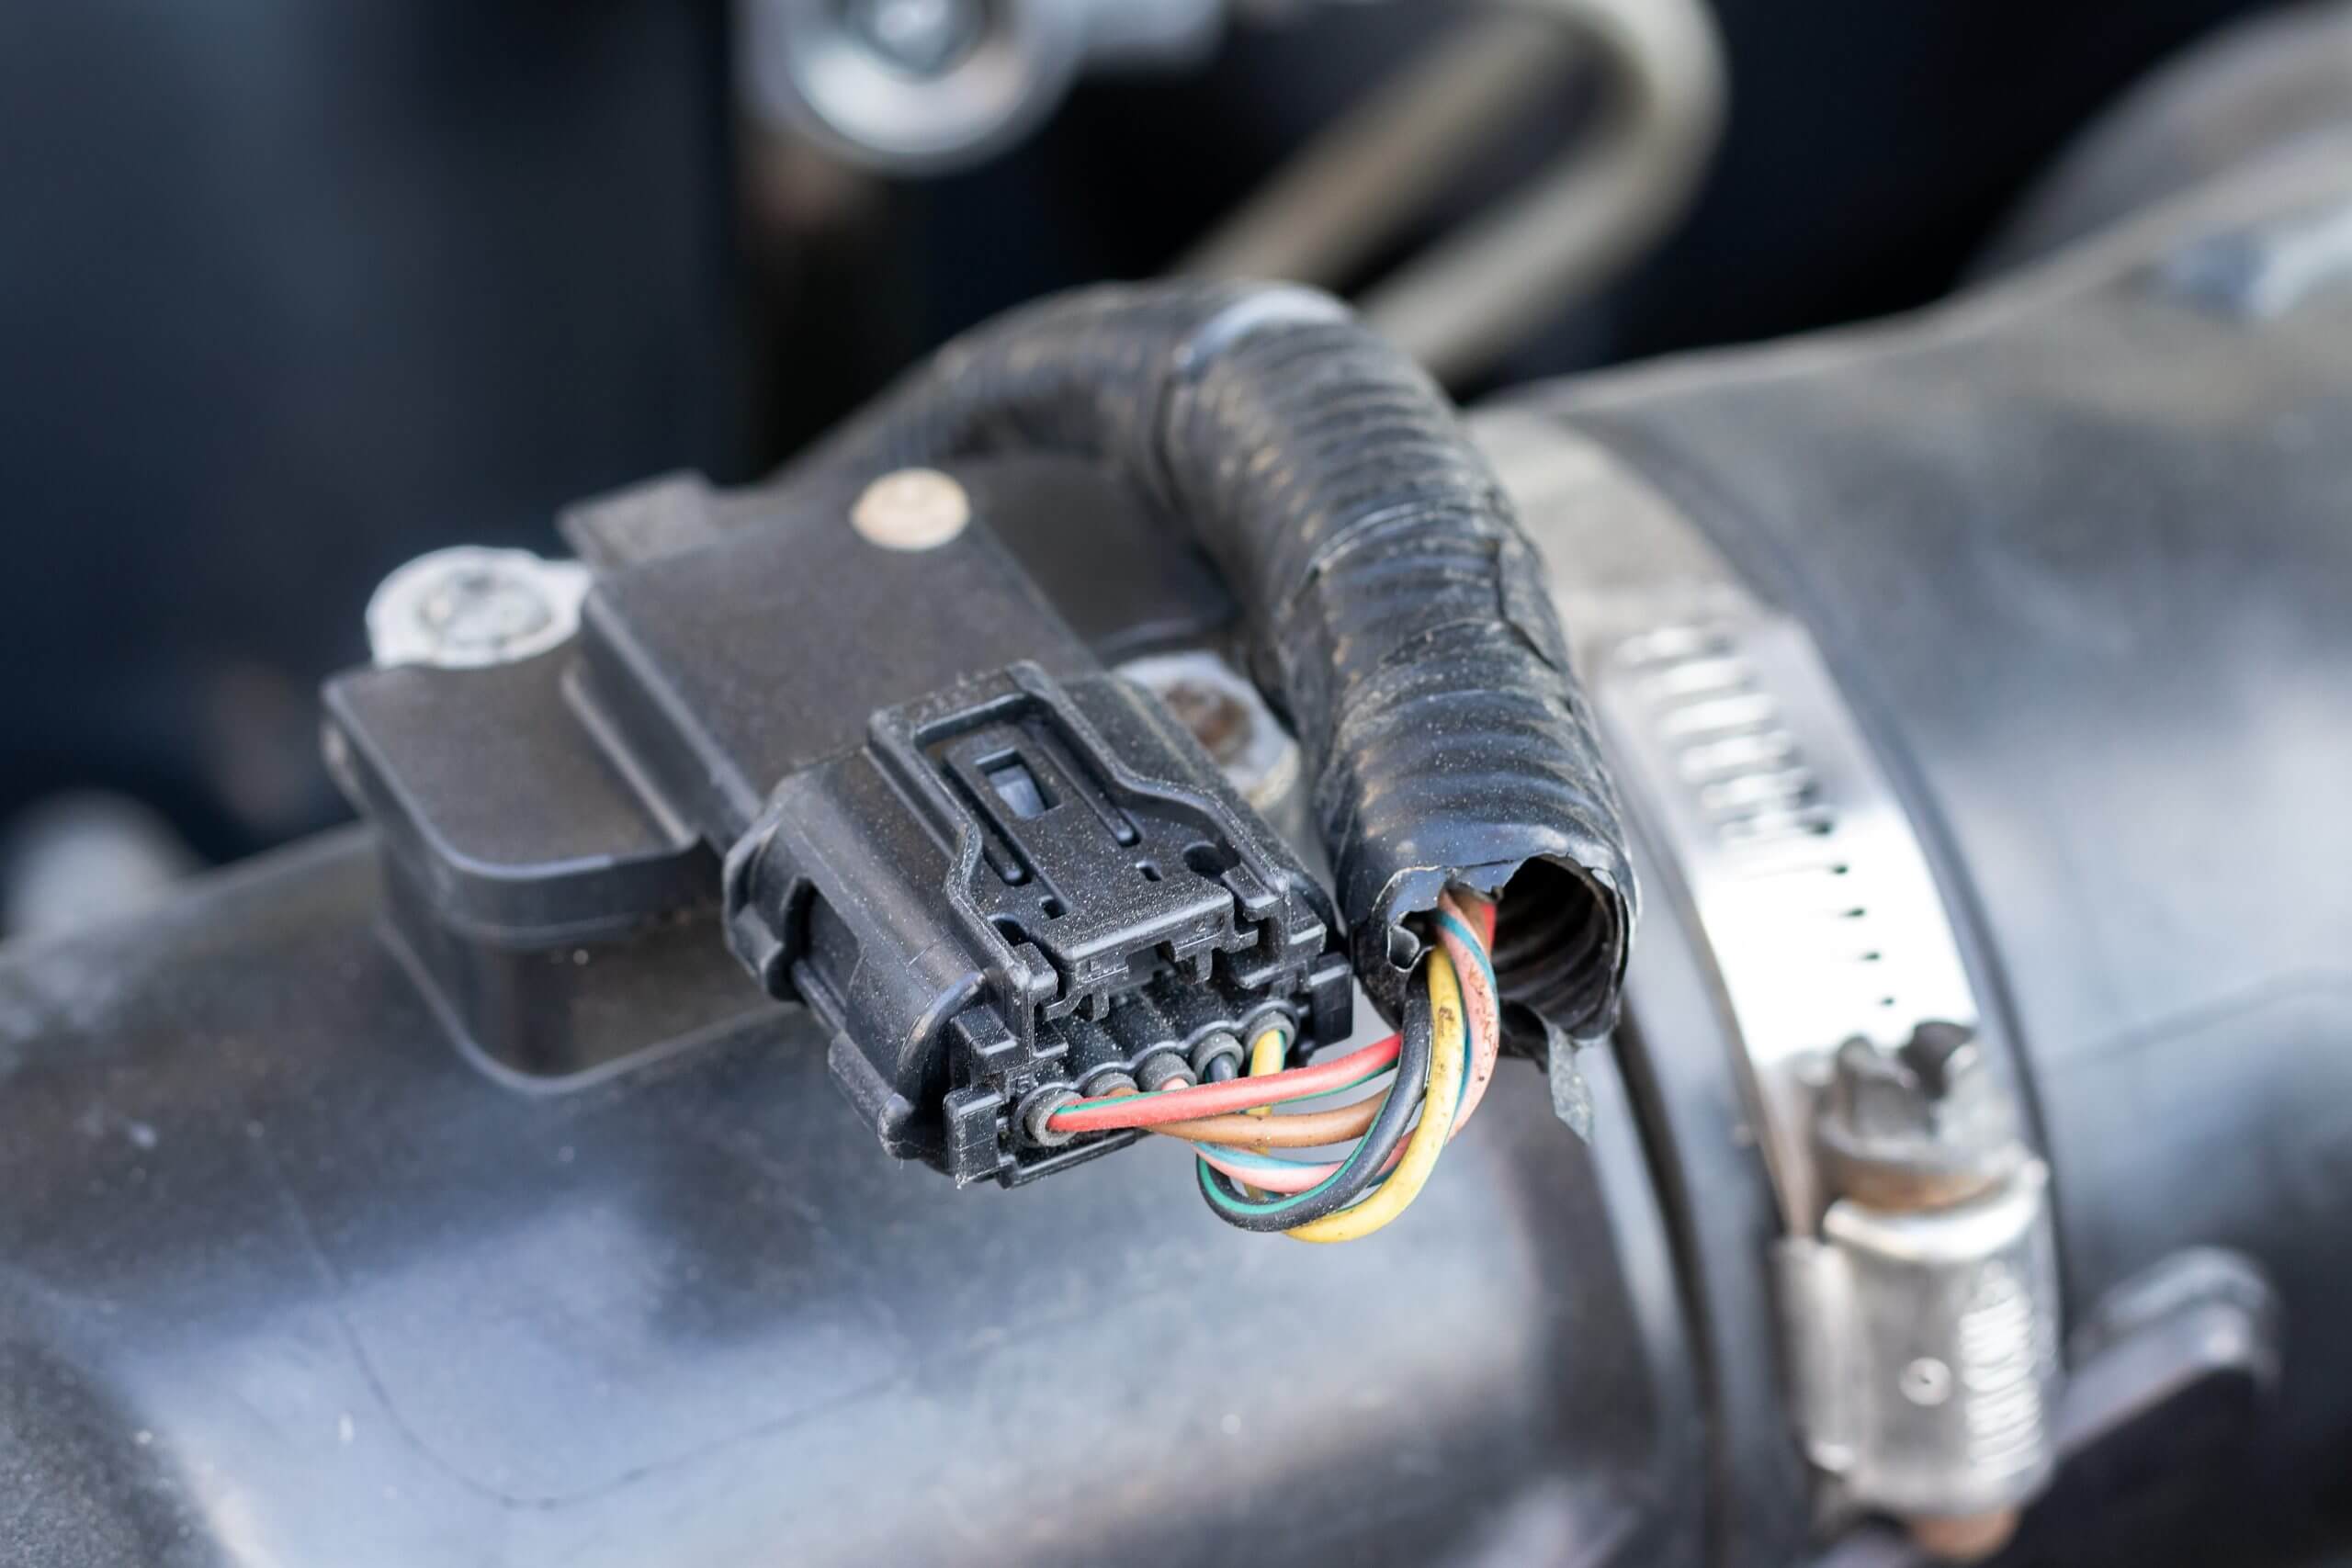 Mass air flow (MAF) sensor under the open hood of a car - measures the air flow in the engine to give the correct readings on the engine control unit (ECU) to adjust the fuel-air mixture